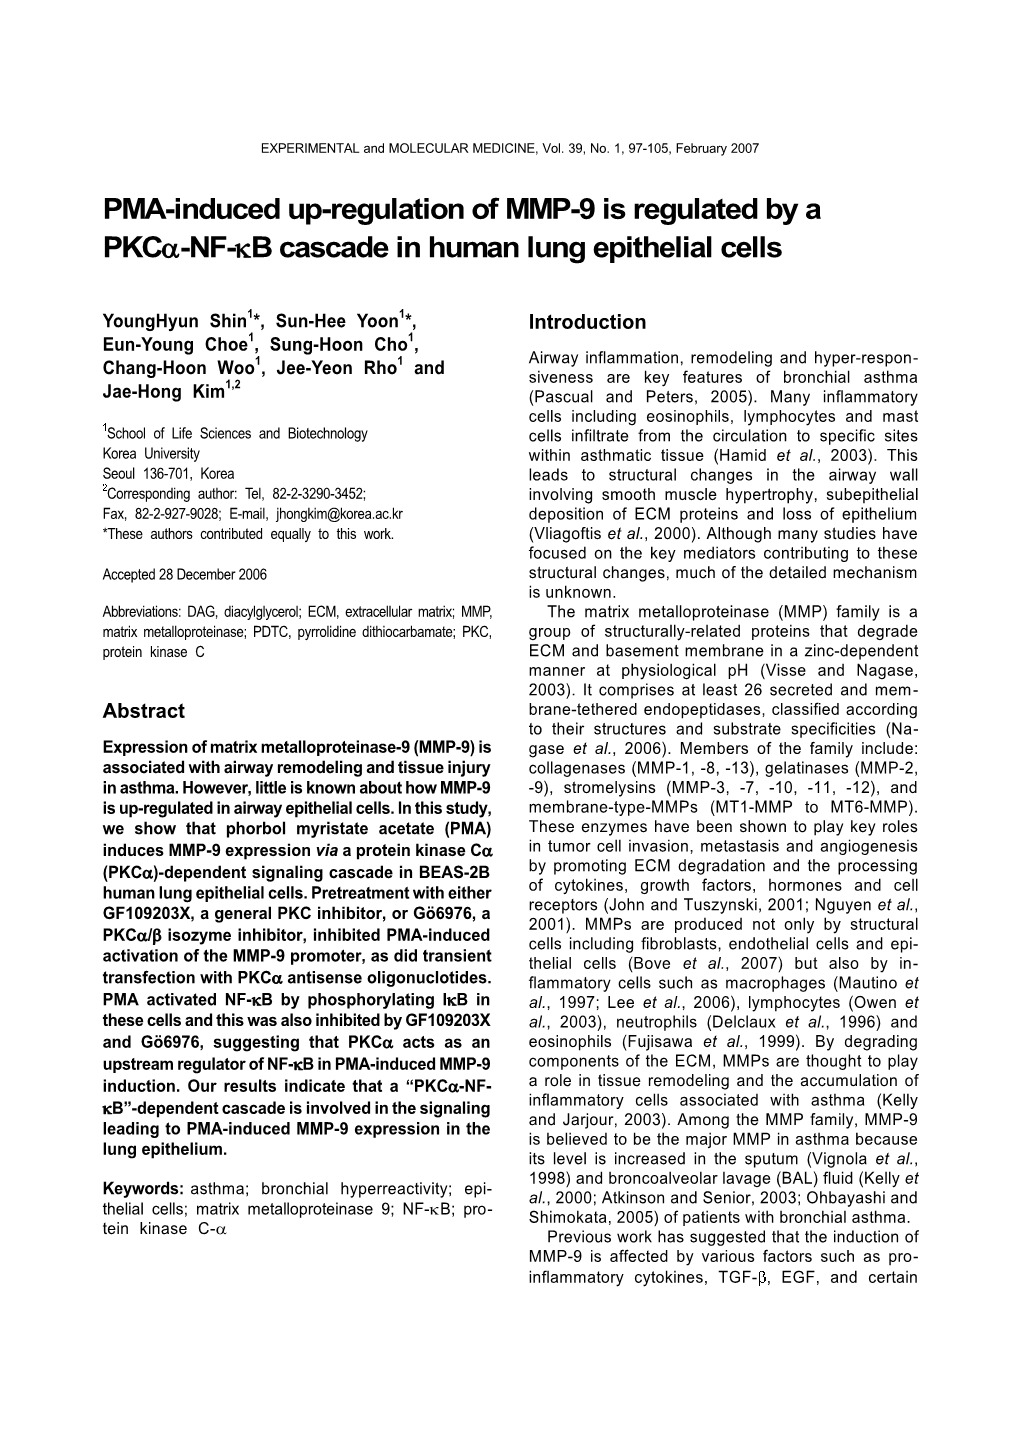 PMA-Induced Up-Regulation of MMP-9 Is Regulated by a Pkcα-NF-Κb Cascade in Human Lung Epithelial Cells